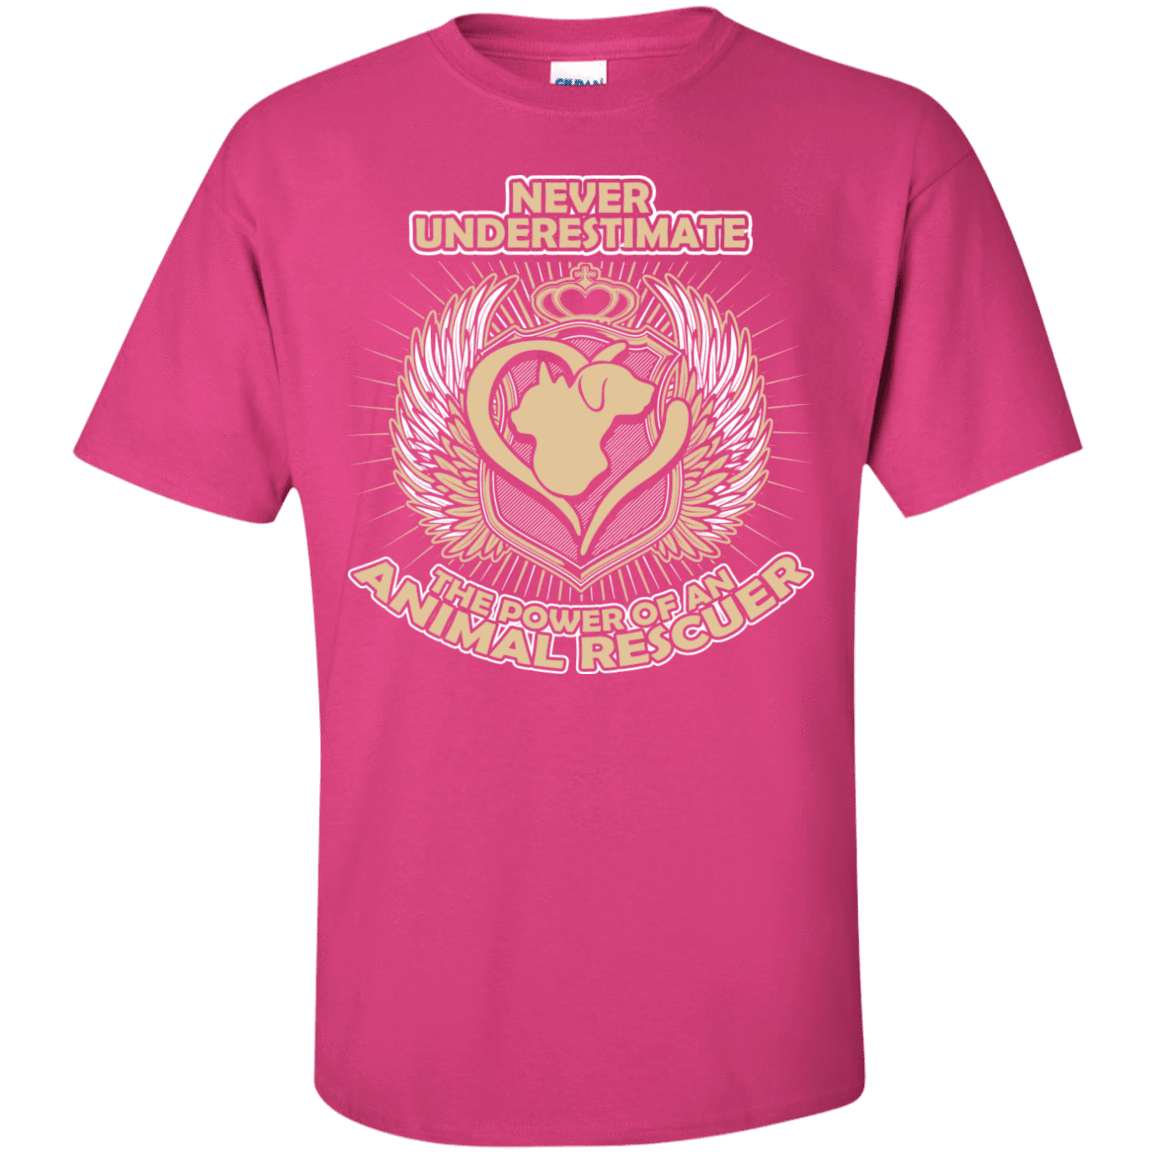 Power Of An Animal Rescuer - T Shirt.